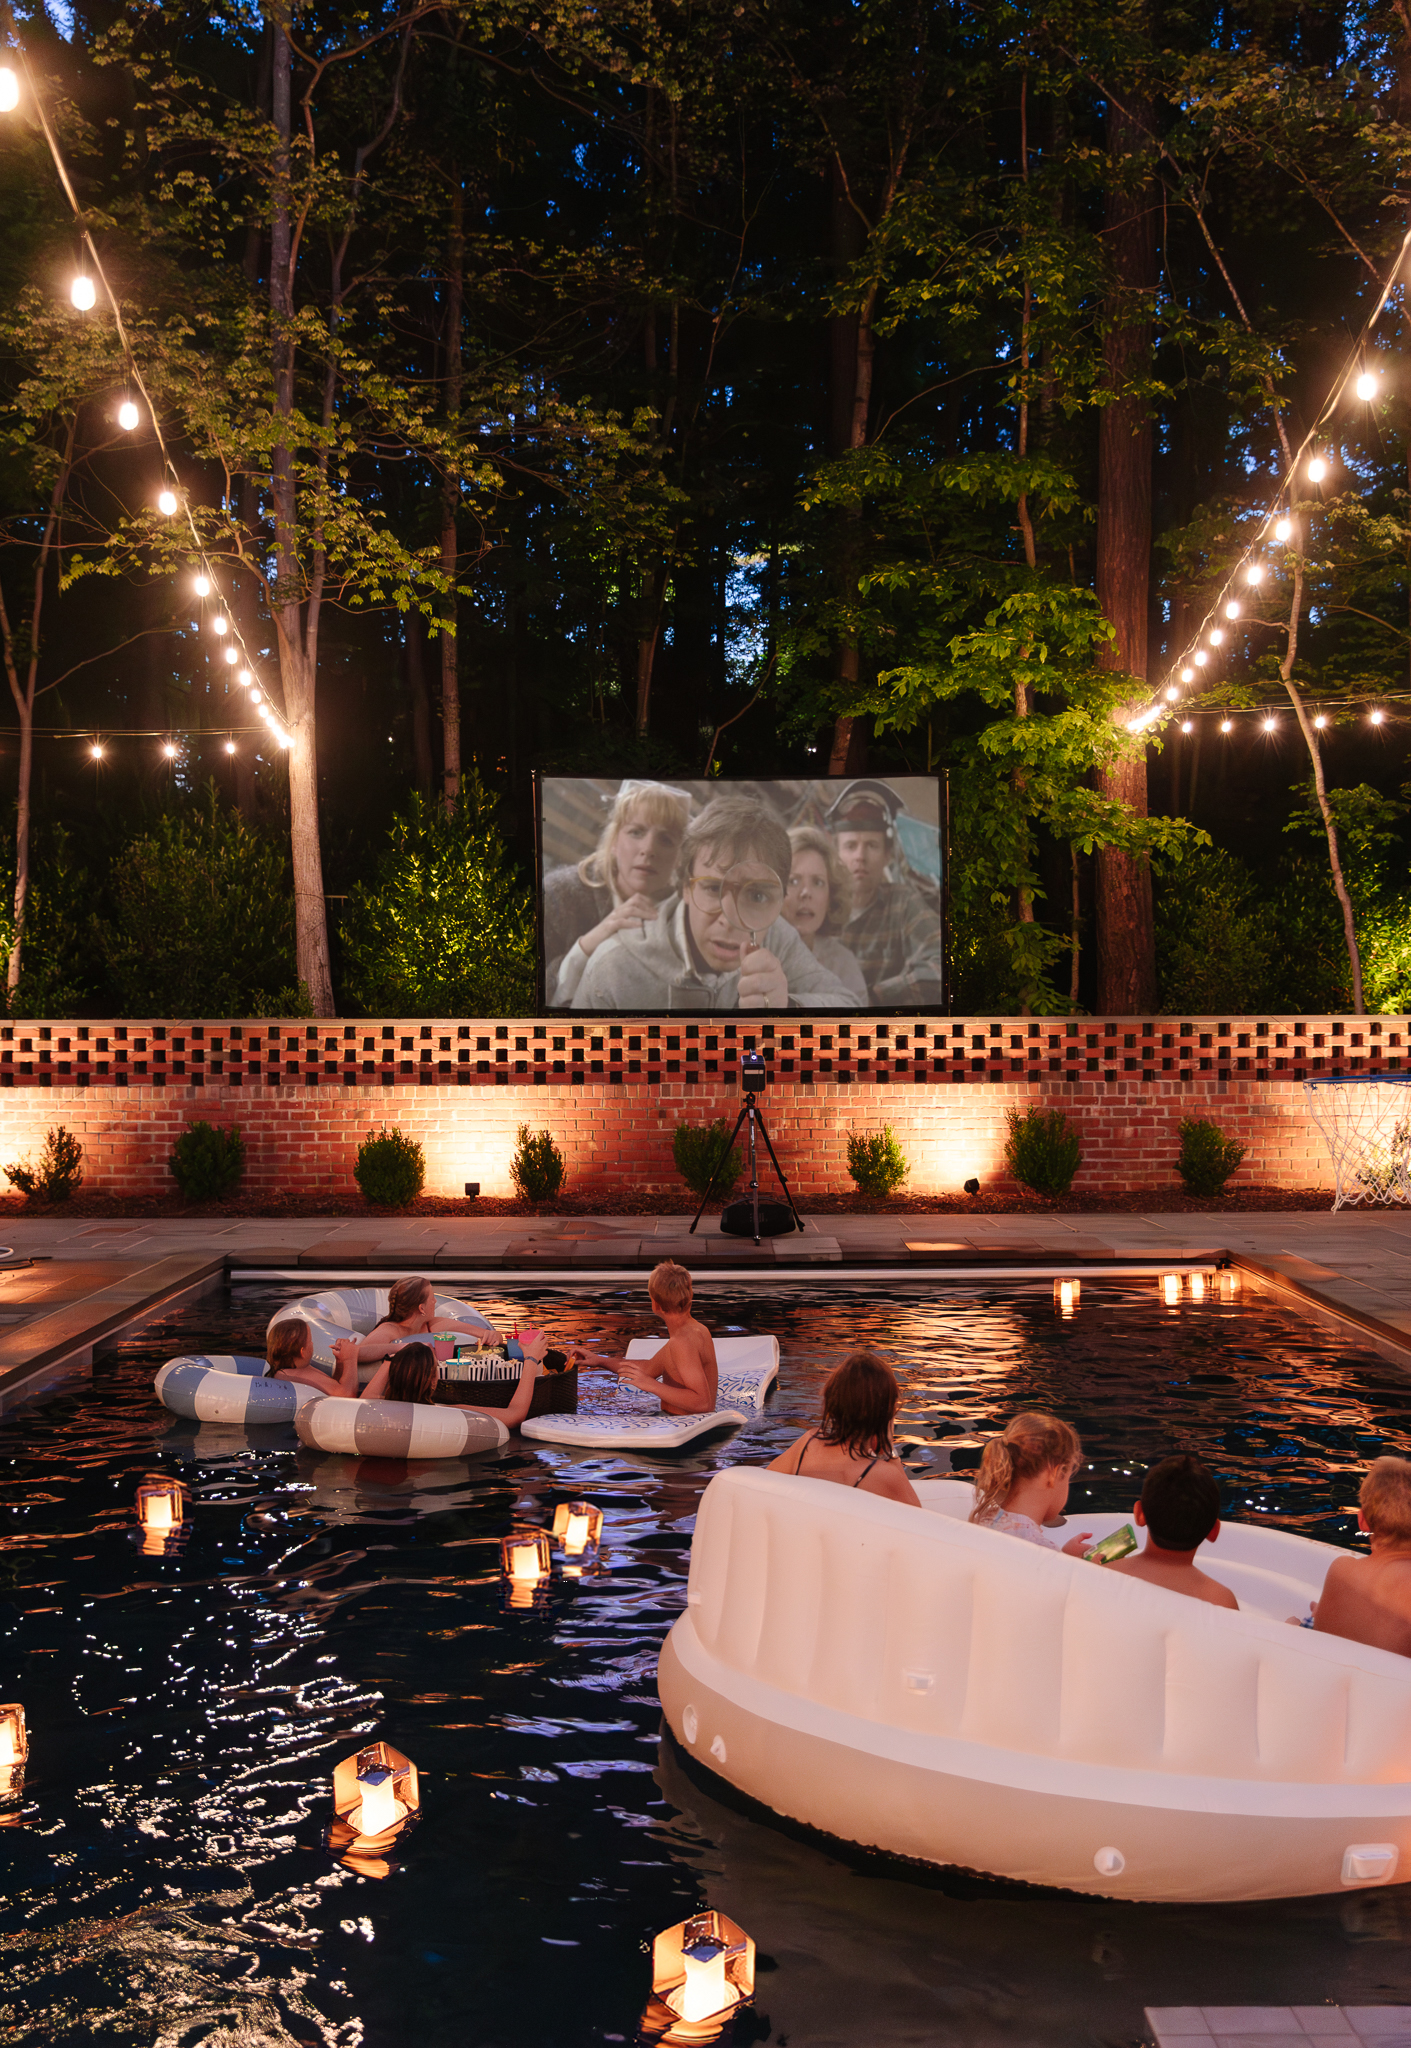 Chris Loves Julia | Outdoor movie pool party at night with inflatable seats, floating lanterns and a projector screen